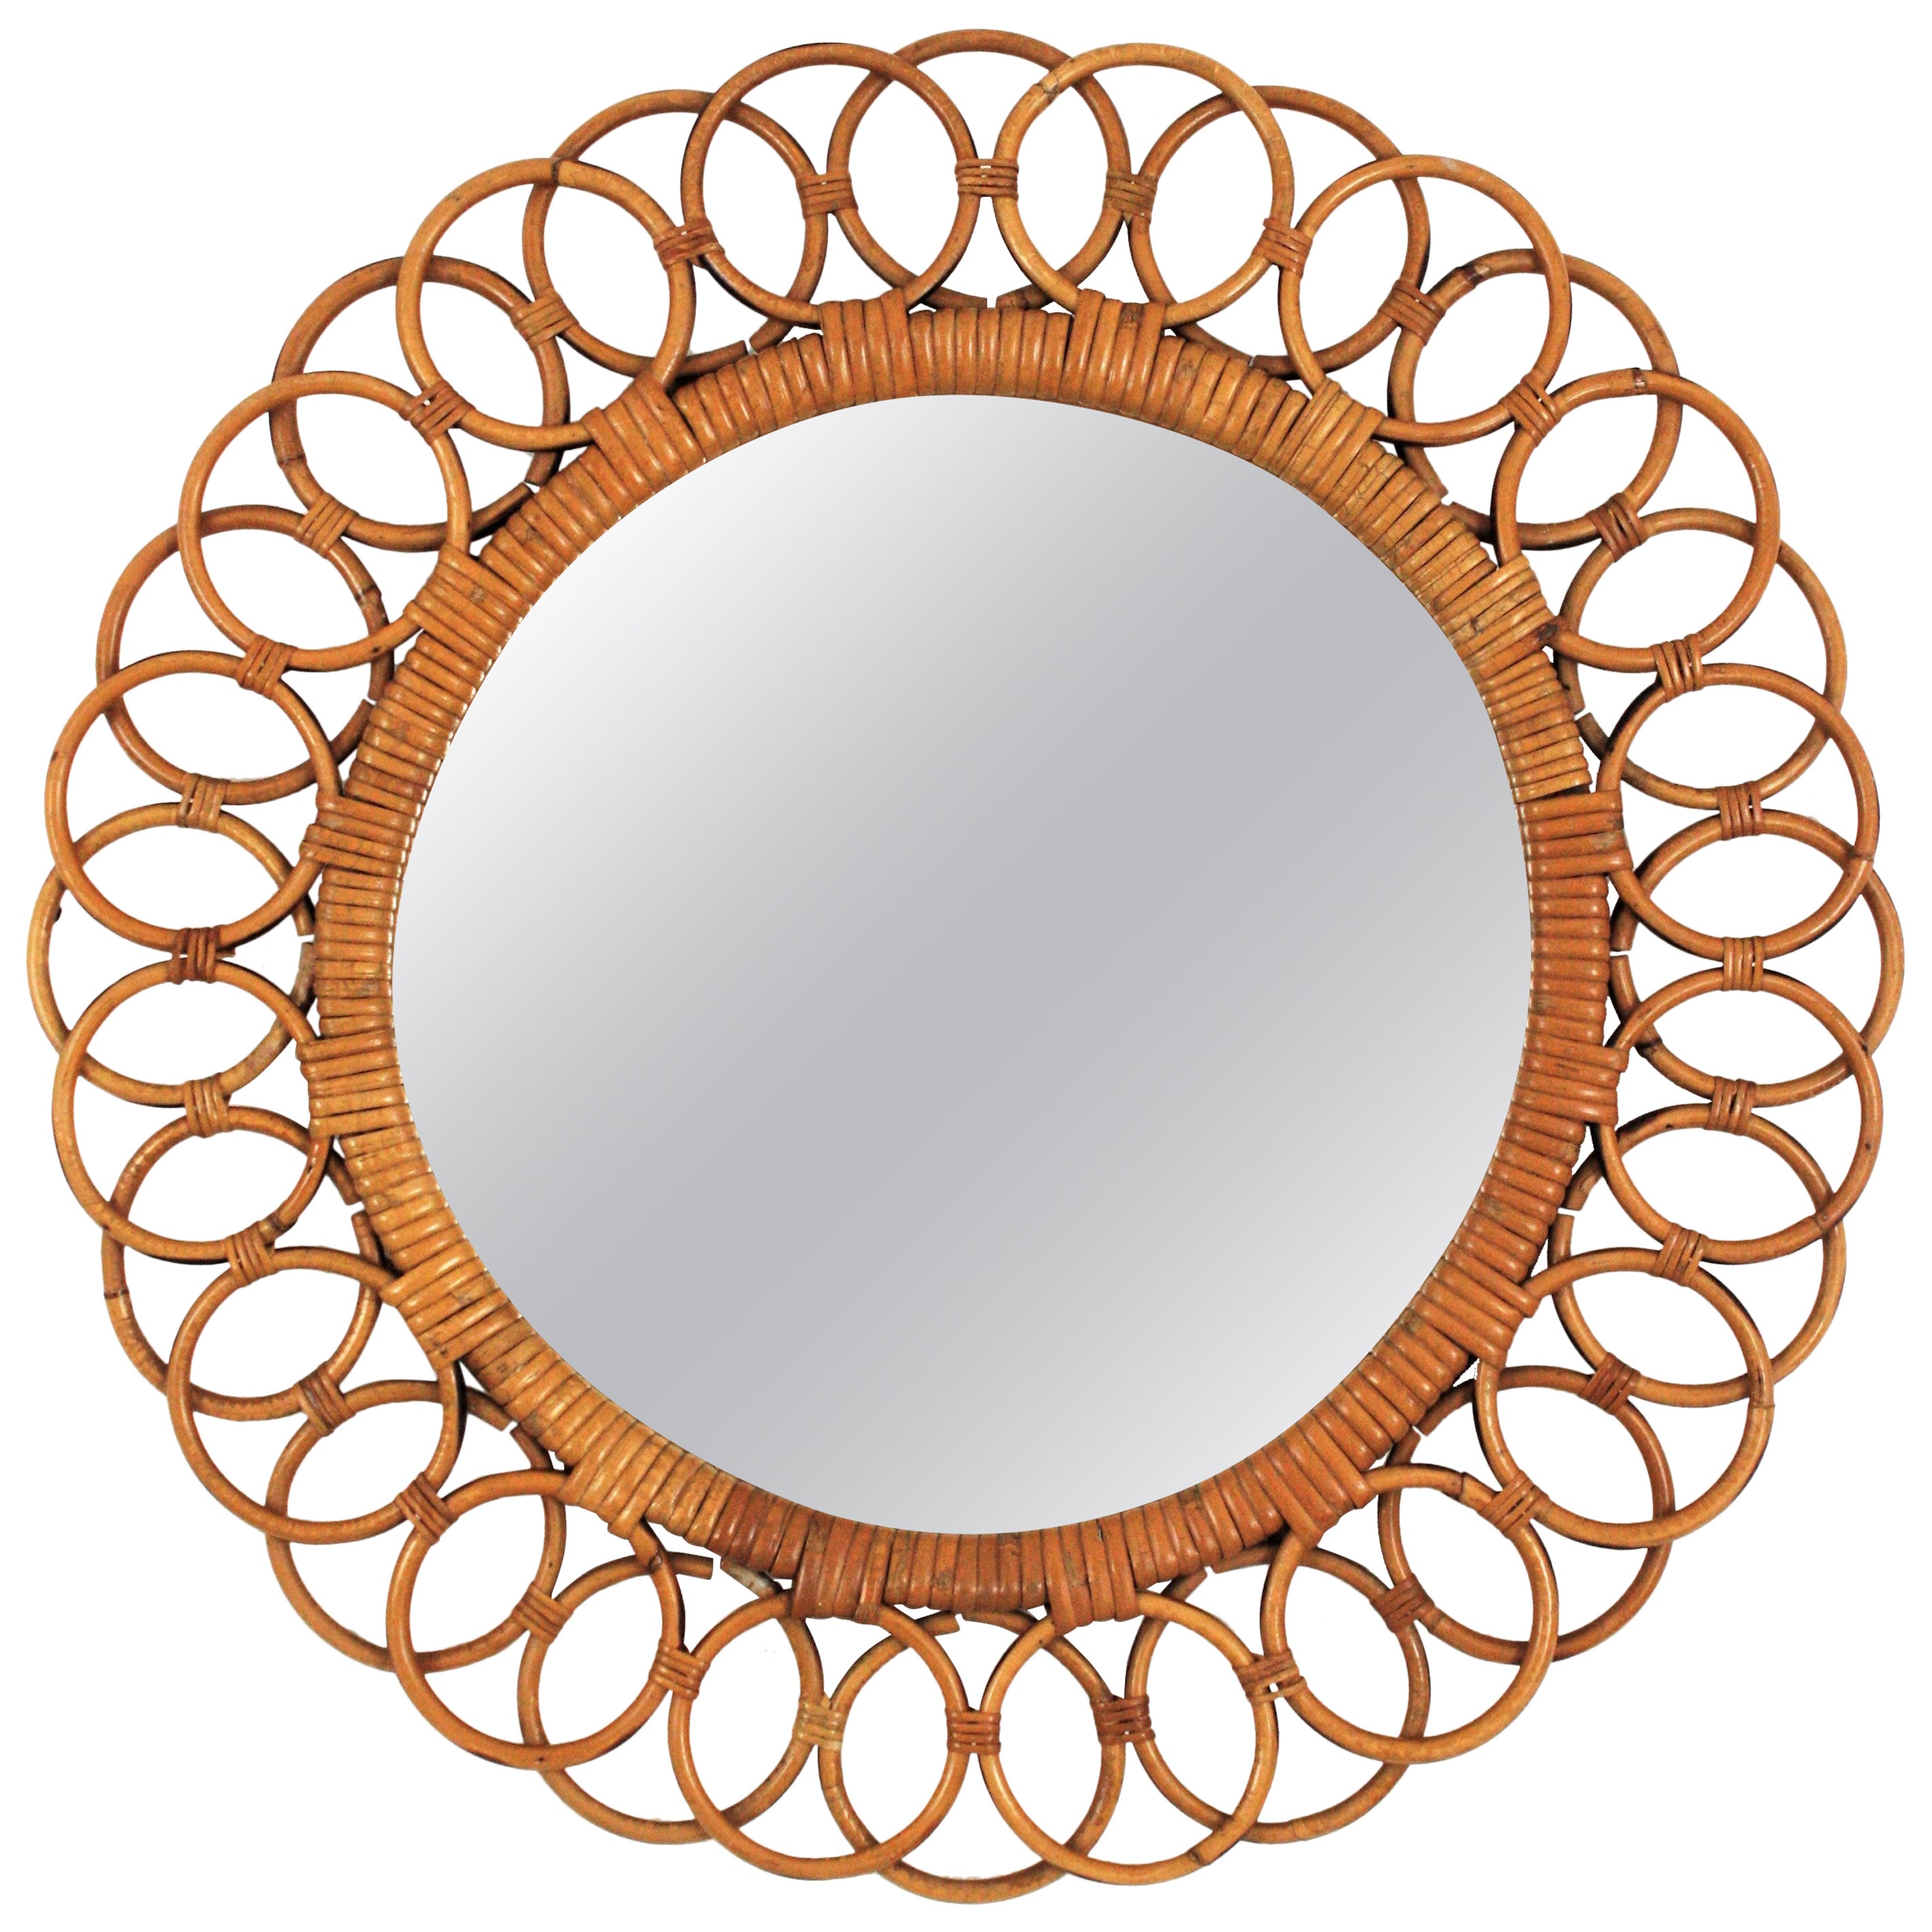 Spanish Rattan Round Mirror with Rings Frame For Sale